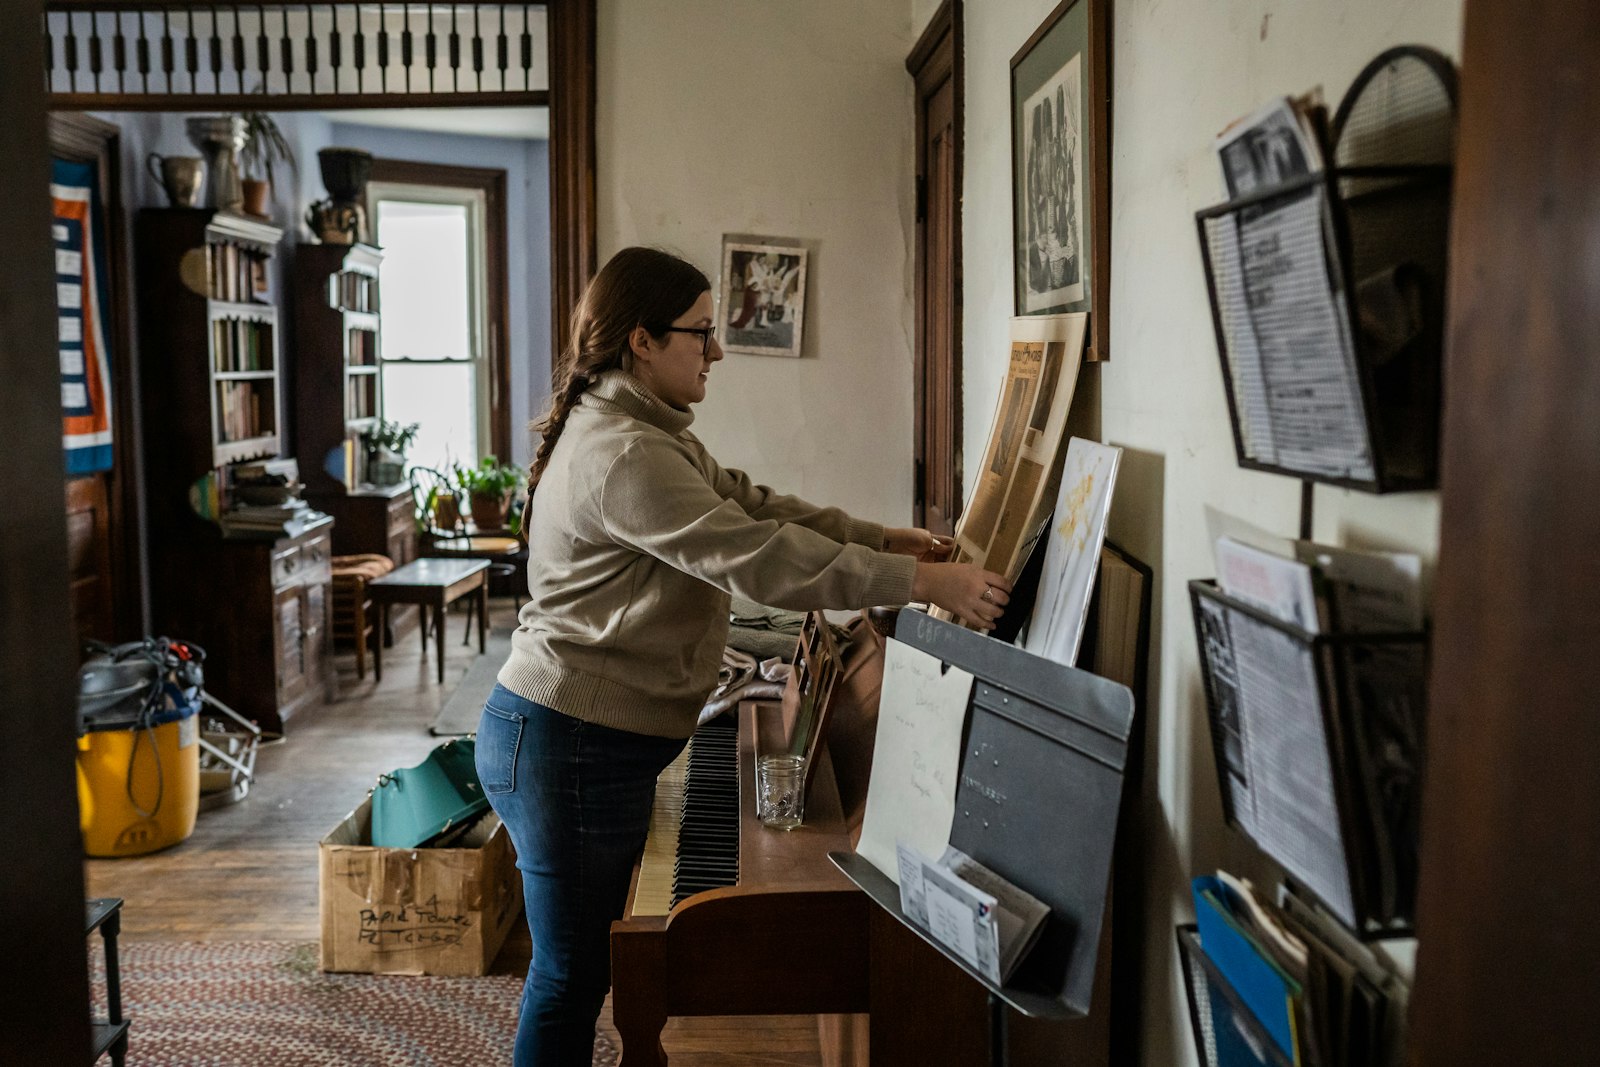 Jordan Kennedy places a newspaper article about the Catholic Worker community on the wall of the Day House on Trumbull Avenue. The worldwide Catholic Worker community was co-founded in the 1930s by Dorothy Day.